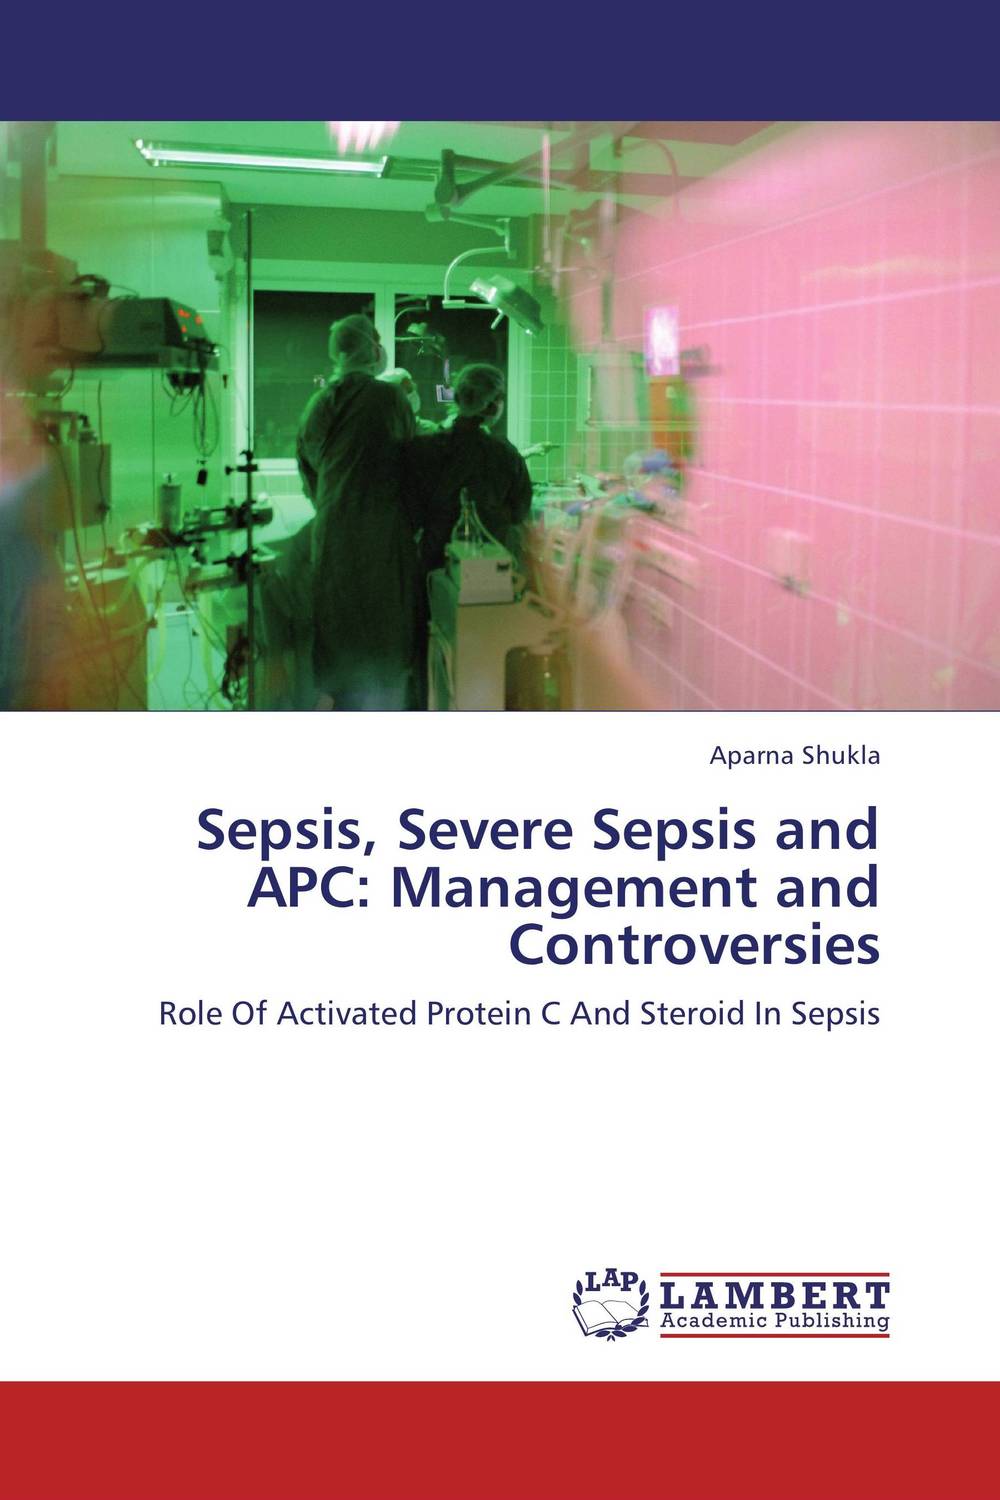 Sepsis, Severe Sepsis and APC: Management and Controversies